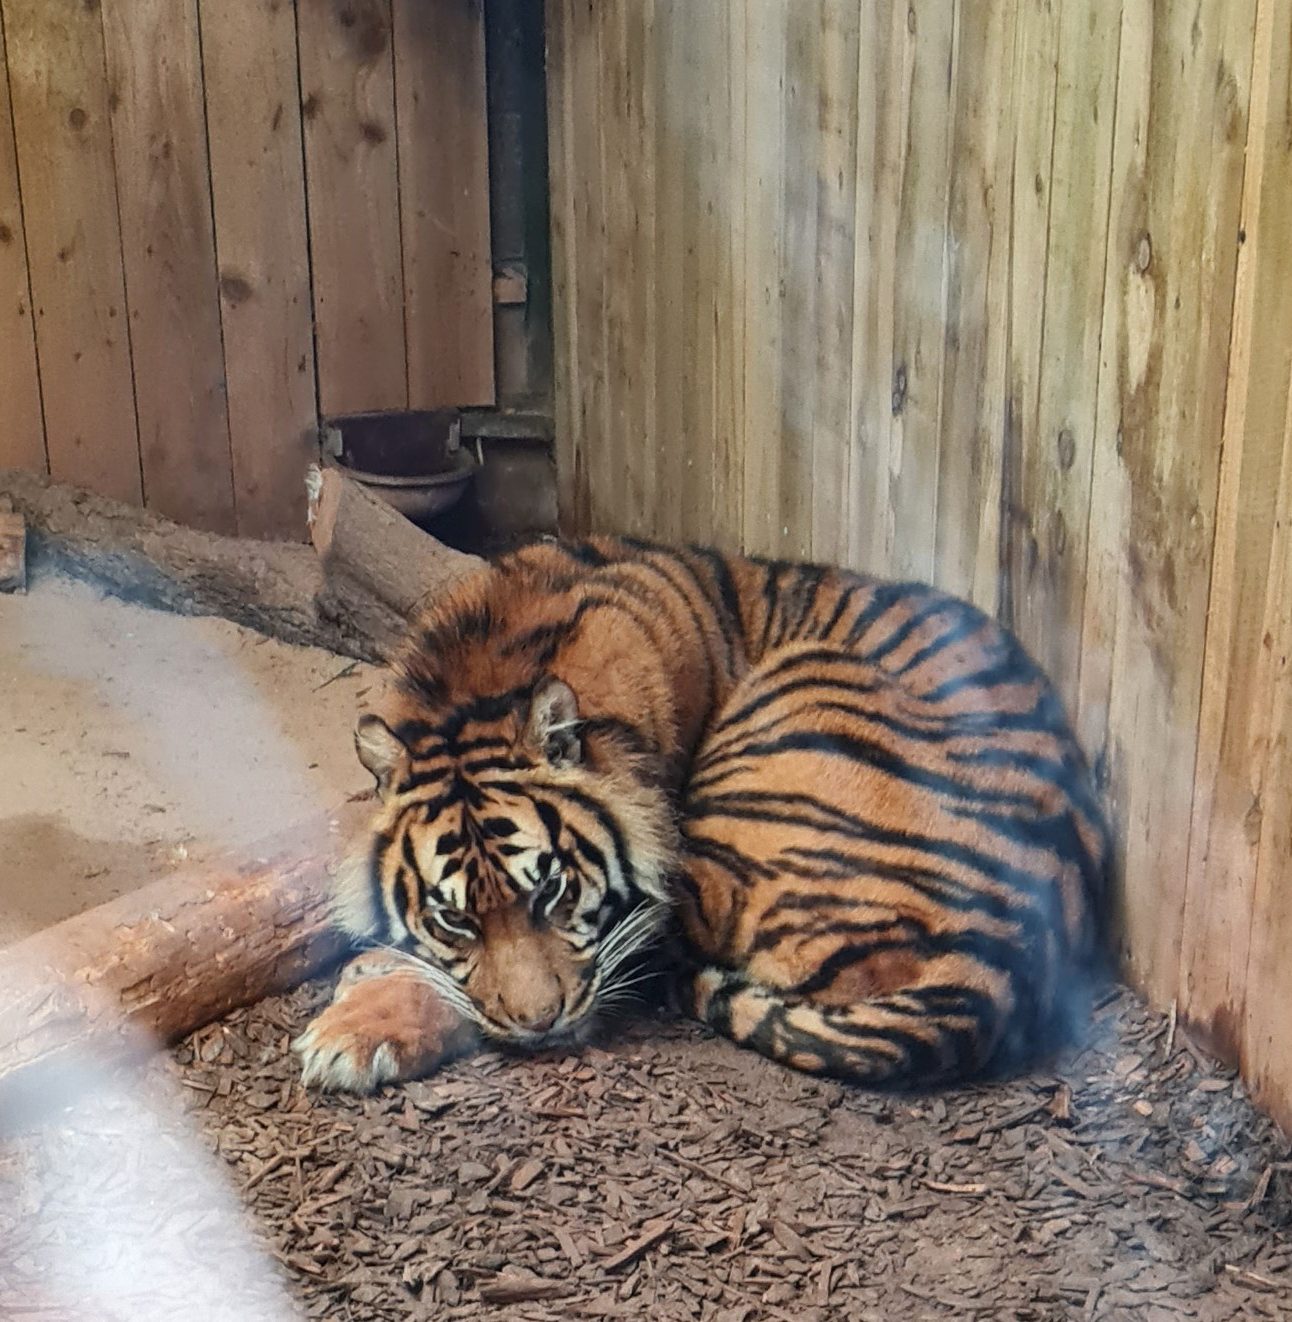 A tiger lies curled in a ball against a wooden fence in a zoo enclosure